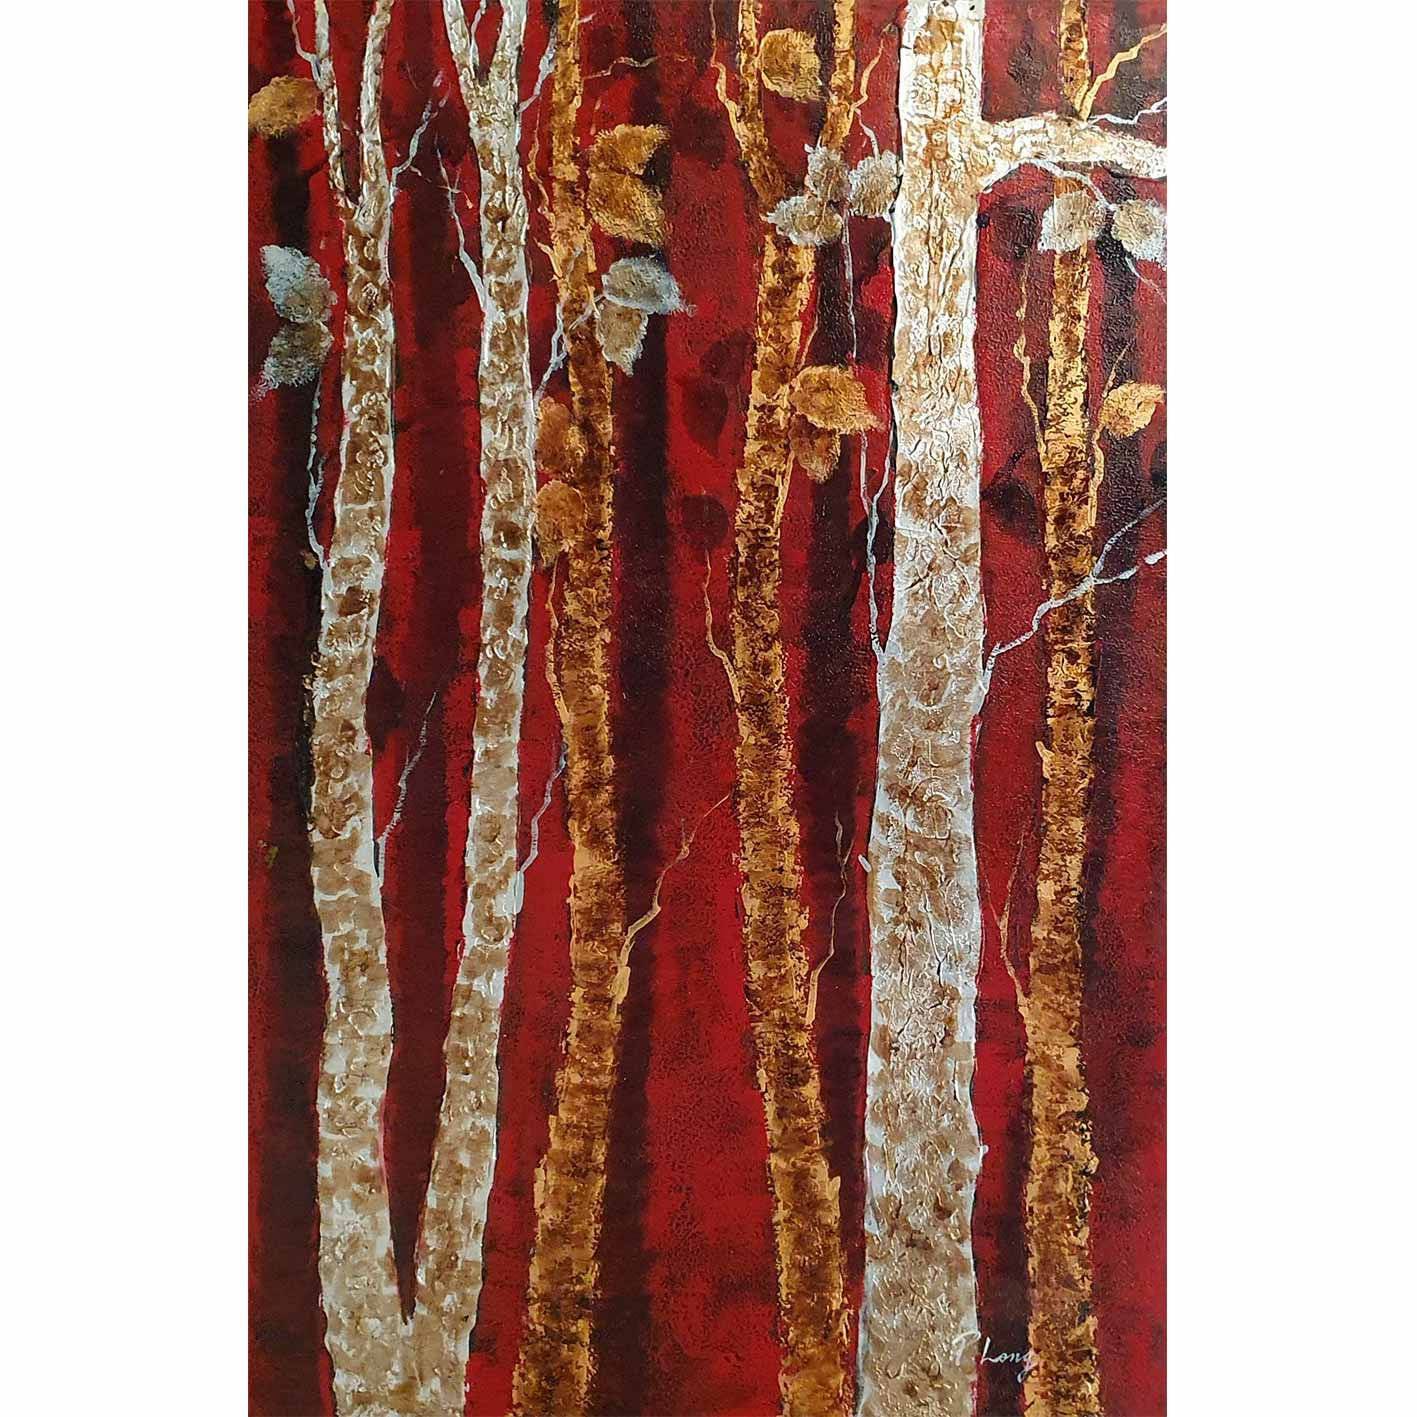 Gold Silver Forest Painting 60x90 cm